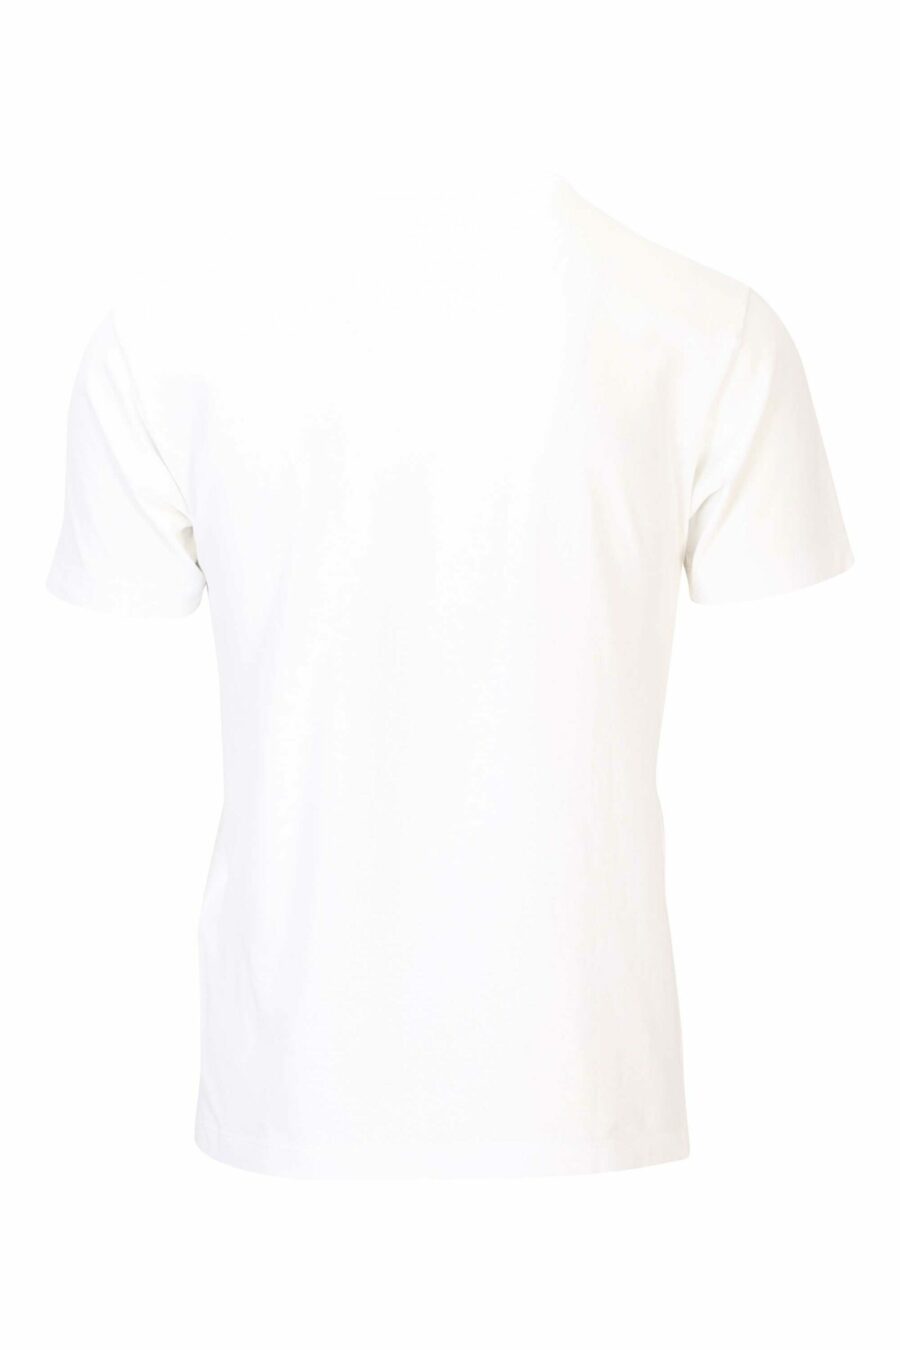 White T-shirt with circular maxilogo on the front - 8052572742361 2 scaled